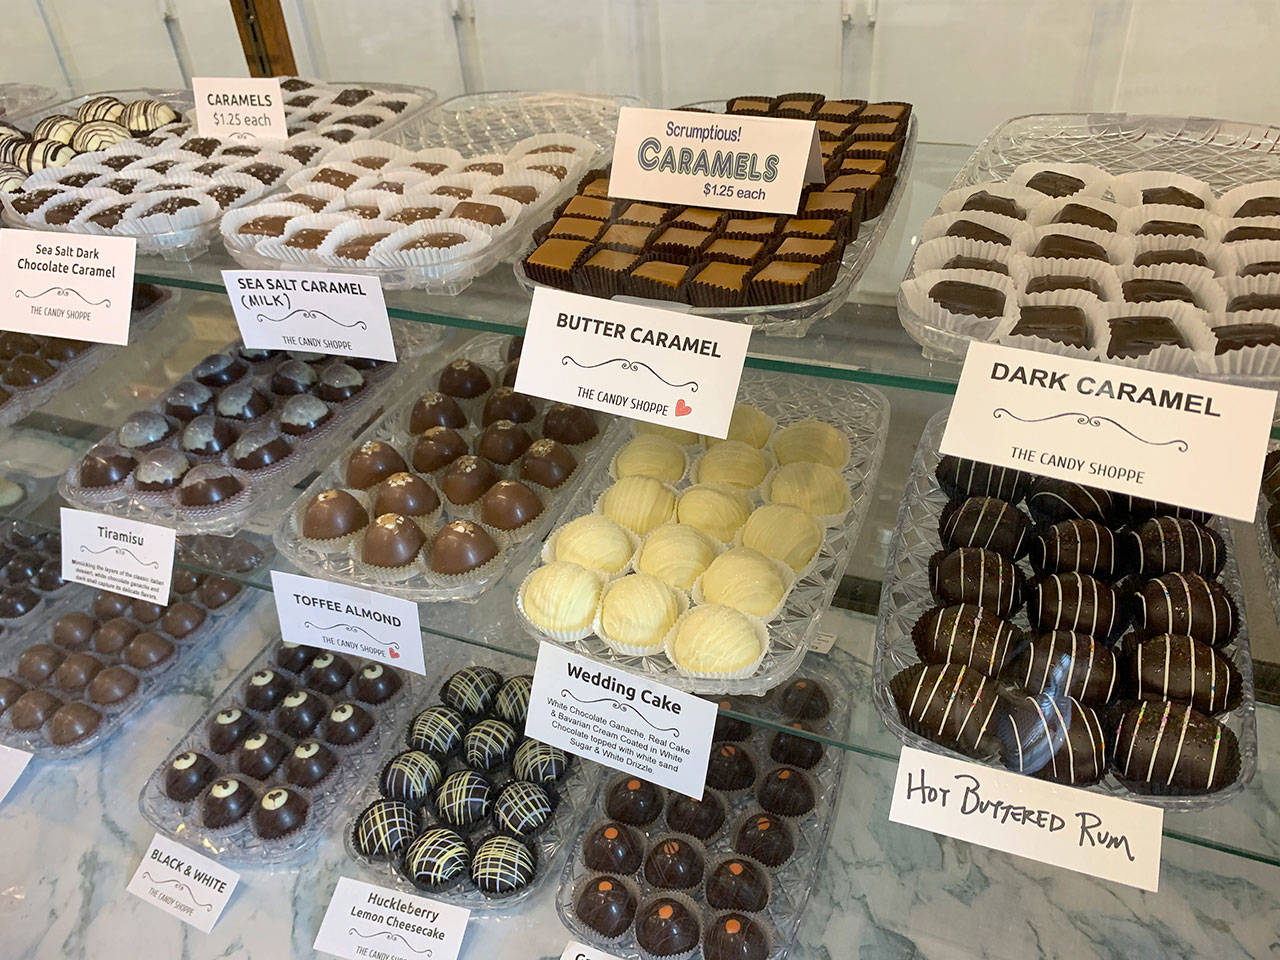 While plain old chocolate is the store’s big seller, customers also crave sea-salt caramel, chocolate walnut and a confectionary called Snickers, which features a caramel center with peanuts and chocolate. (Bob Smith | Kitsap Daily News)